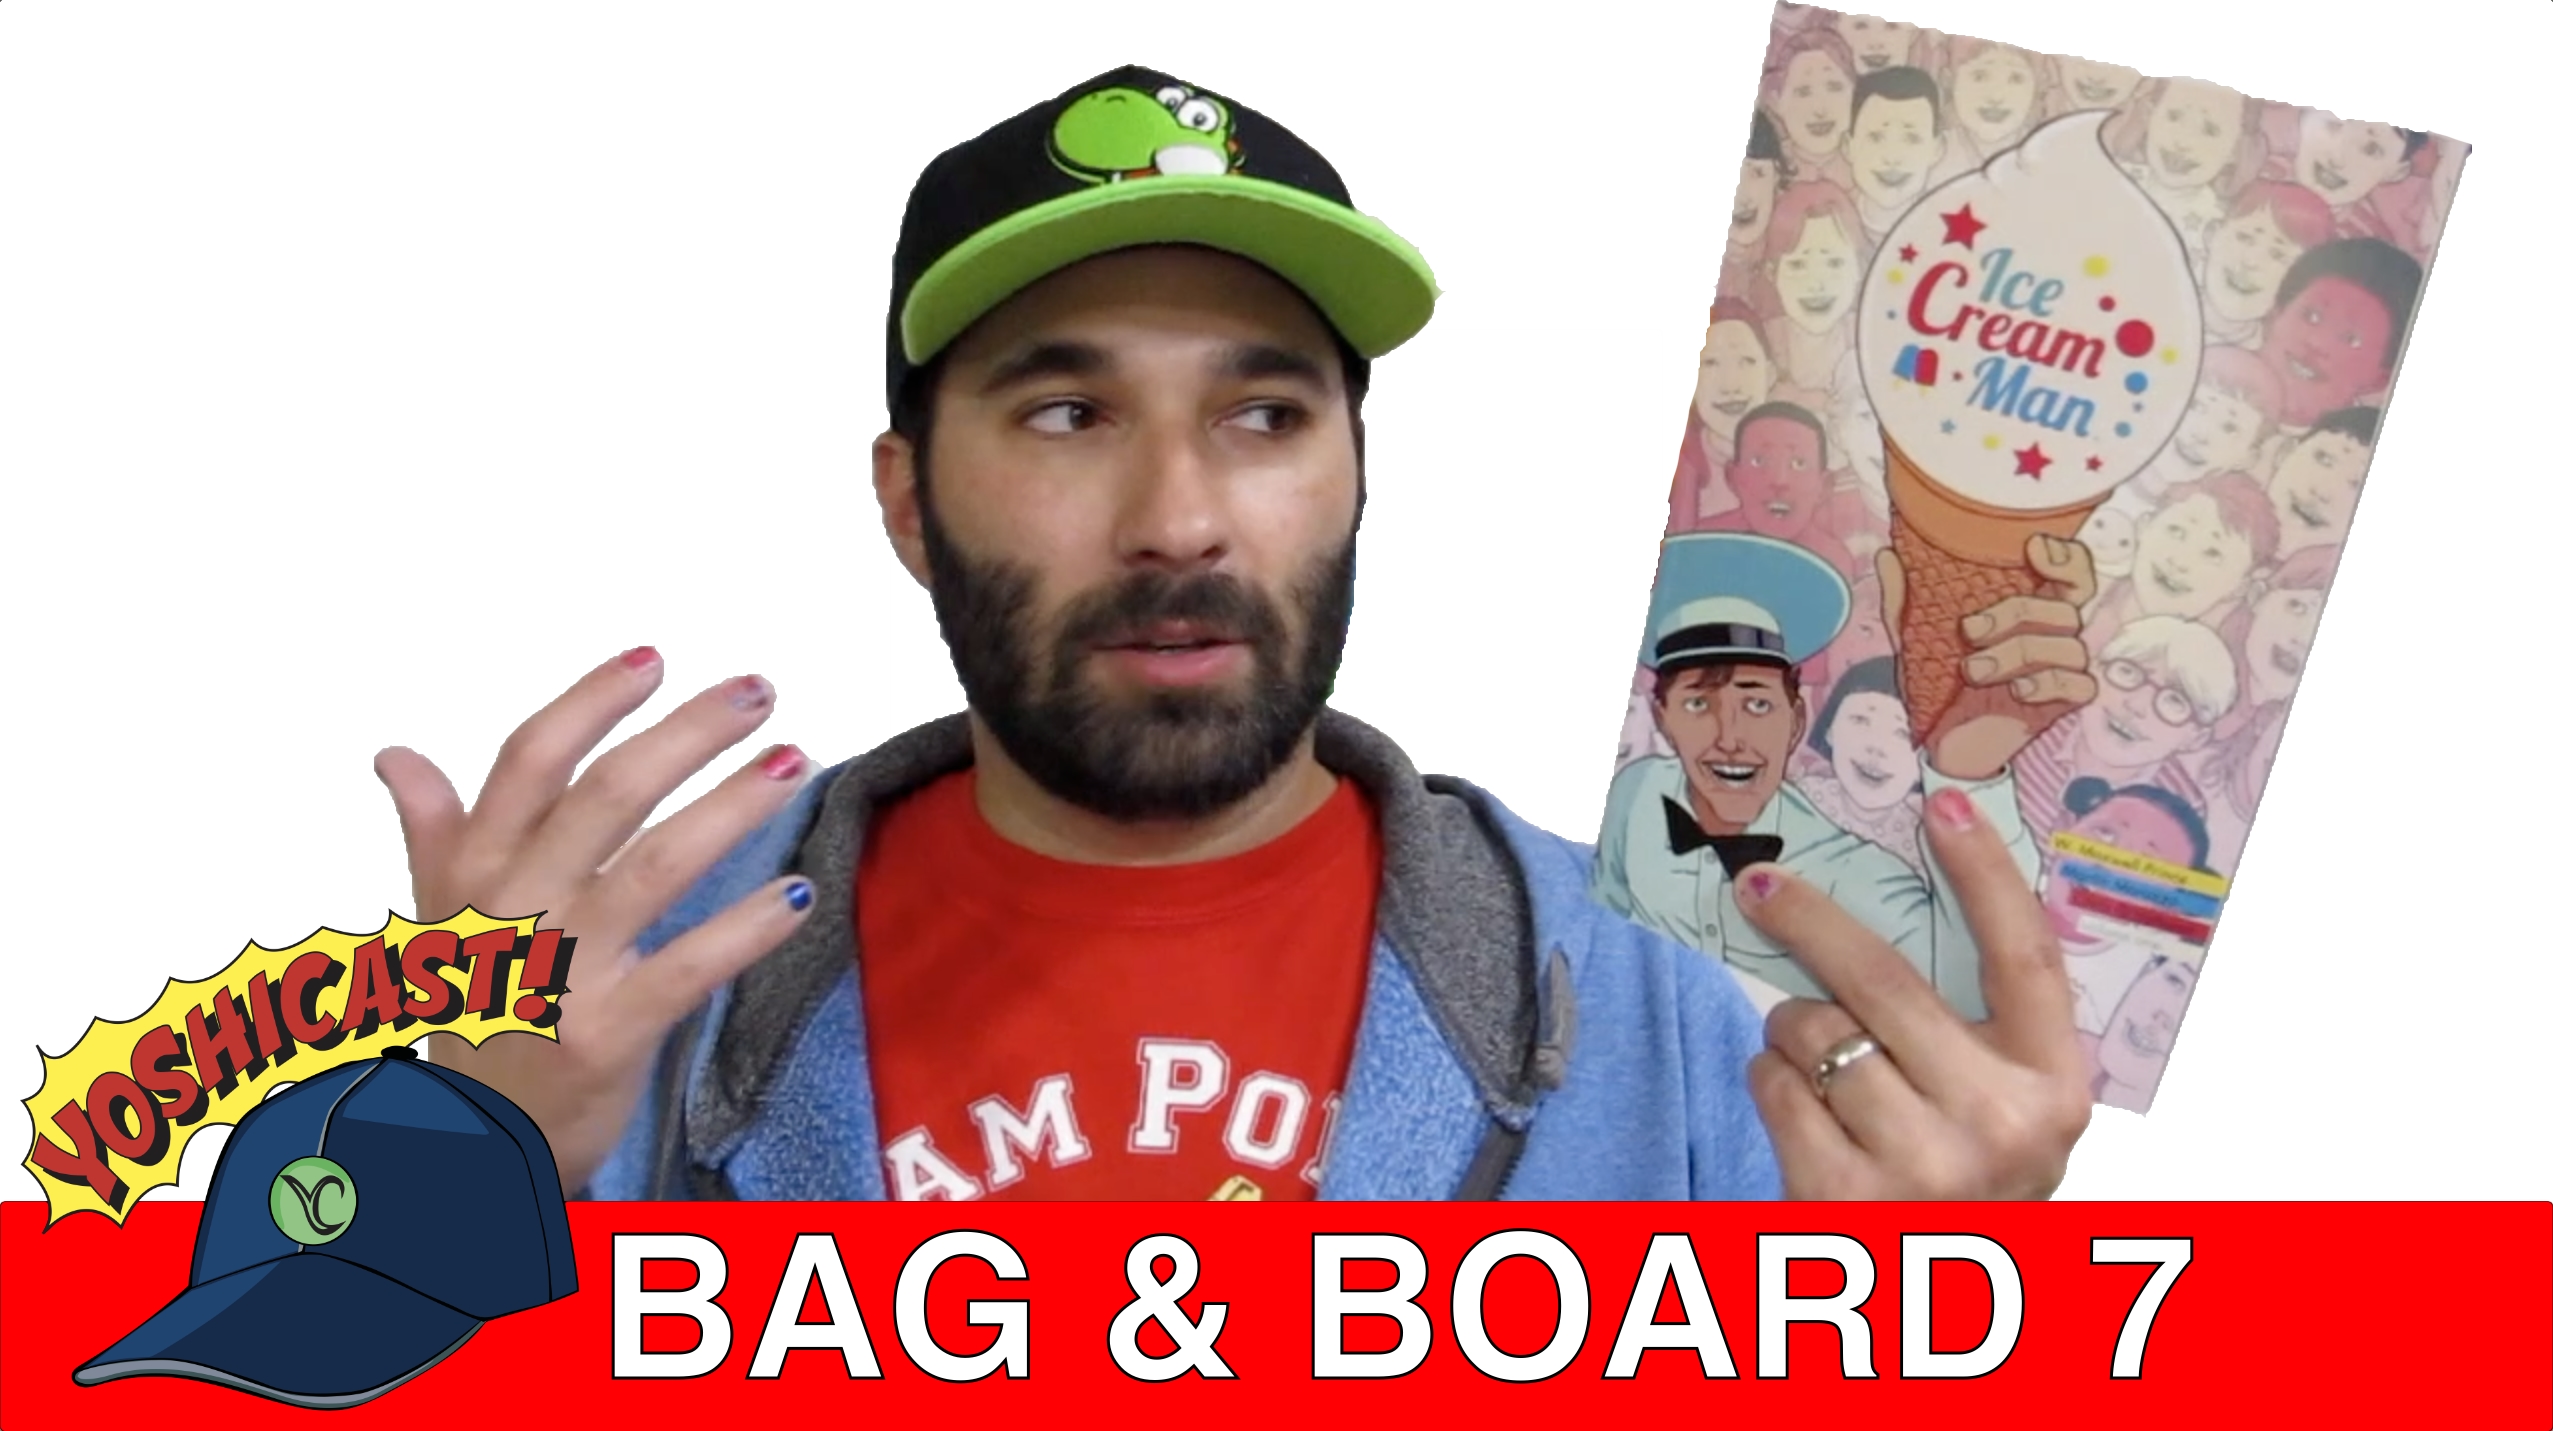 Bag & Board 7 | New Comic Book Pickups ICE CREAM MAN, PUNISHER, GHOST RIDER, DAREDEVIL, And More